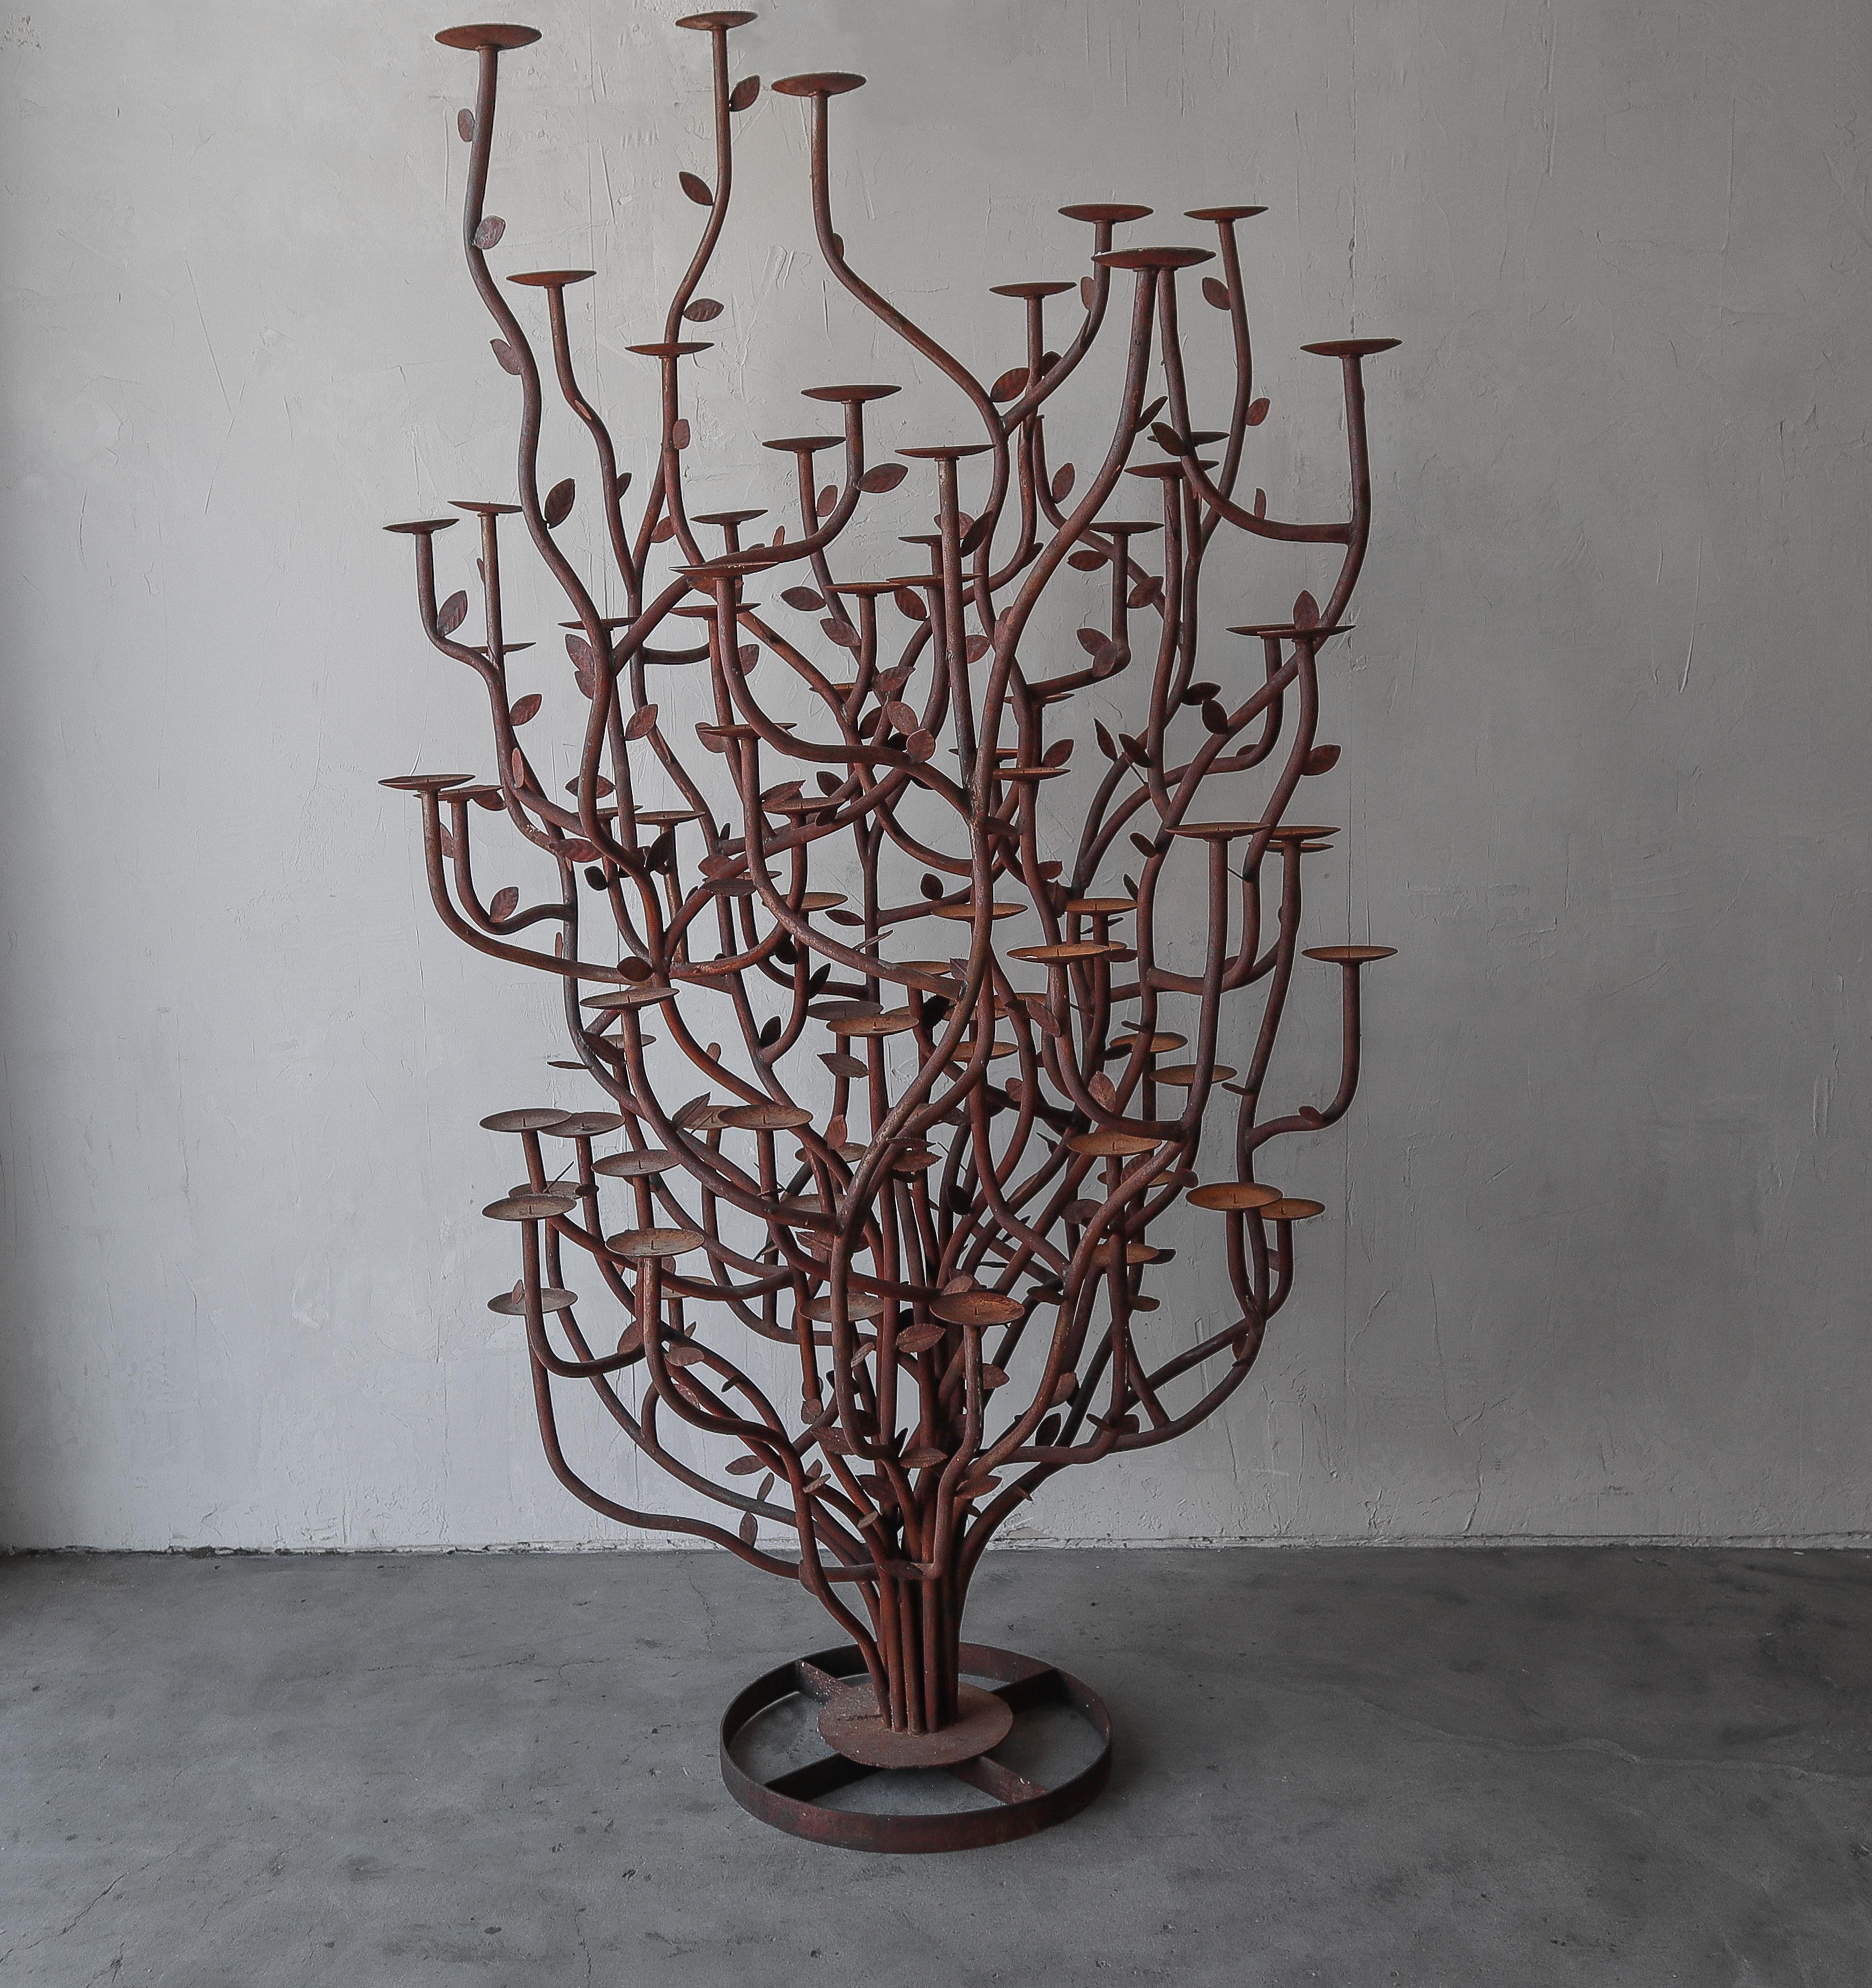 MONUMENTAL artisan made candelabra.  This candelabra is a true piece of art, standing at over 8ft high, it is formed out of iron bent to resemble a tree or bush with branches or leaves.  How incredible would this piece look illuminated?

The